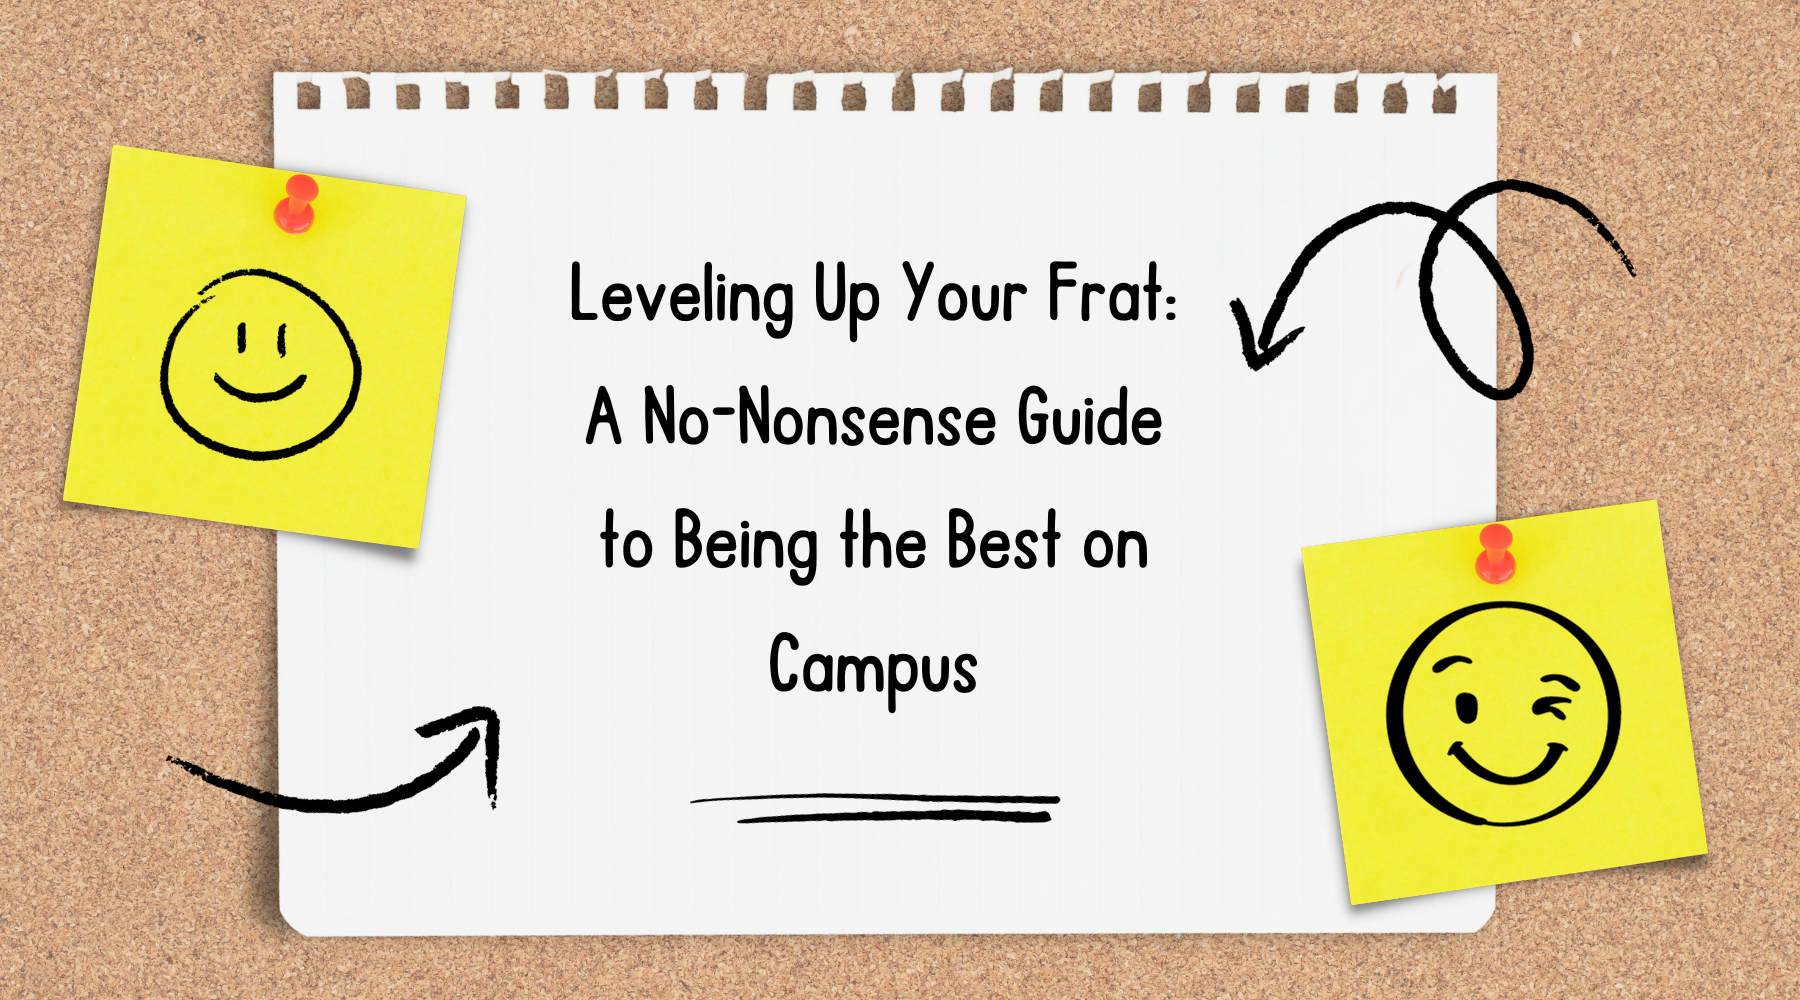 Leveling Up Your Frat: A No-Nonsense Guide to Being the Best on Campus